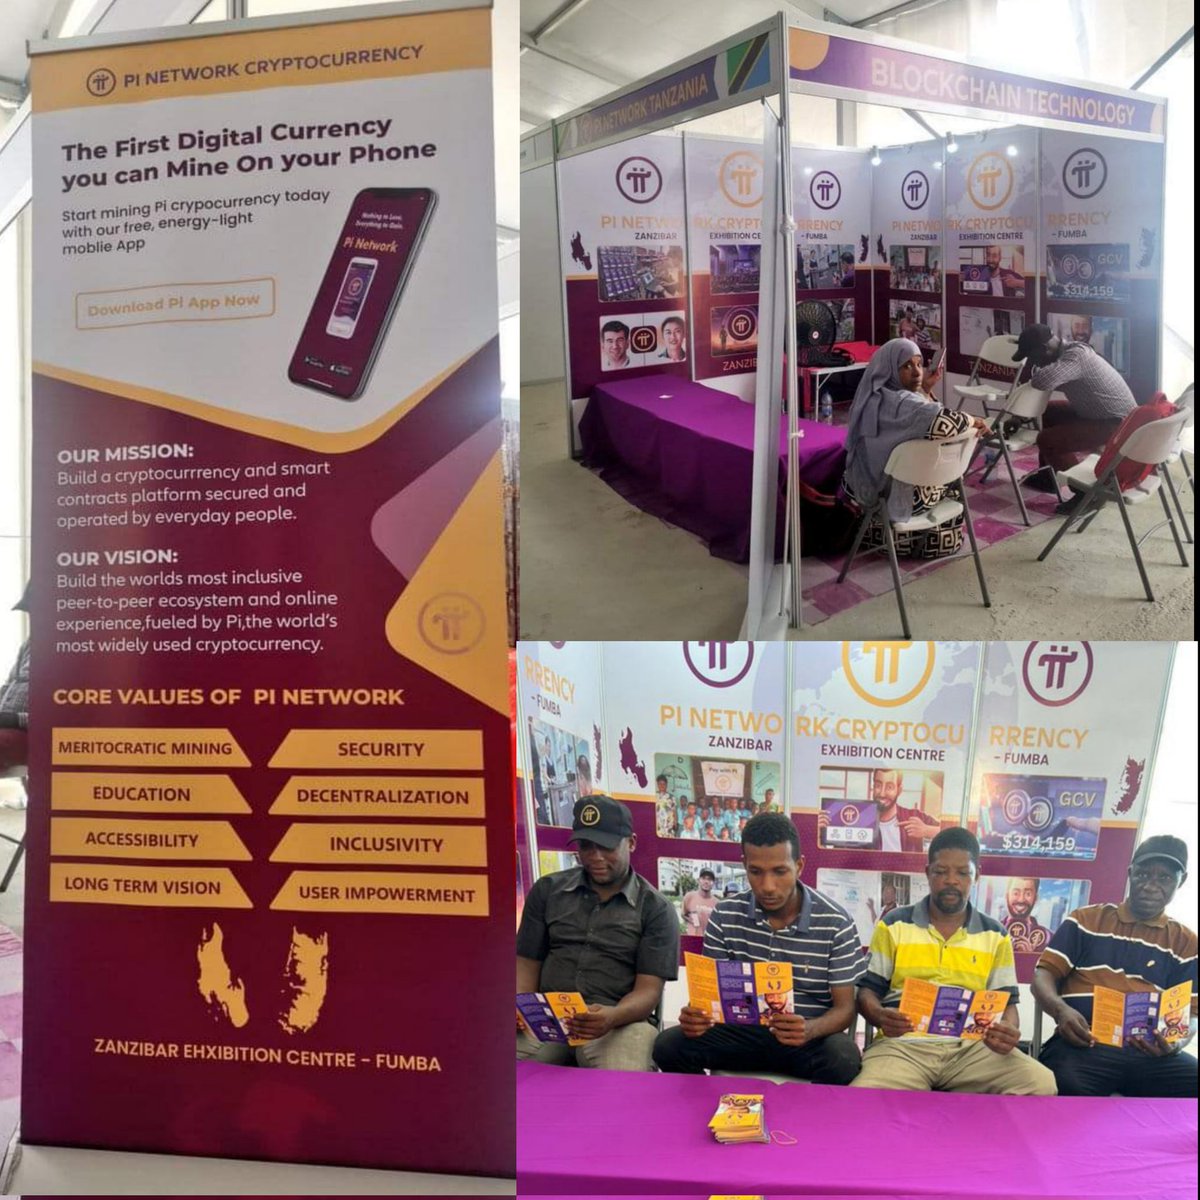 🎉 #Pi Awareness & #PiBarter Festival held at Zanzibar Exhibition Center Fumba, Tanzania.🇹🇿 
Just keep our passion for #PiNetwork Alive❣️ 
Join my mining team on PiNetwork:
minepi.com/EmerPi01
Enter invitation code: EmerPi01

#PayWithPi #PiGoals2024 #OpenMainnet #PiCommerce